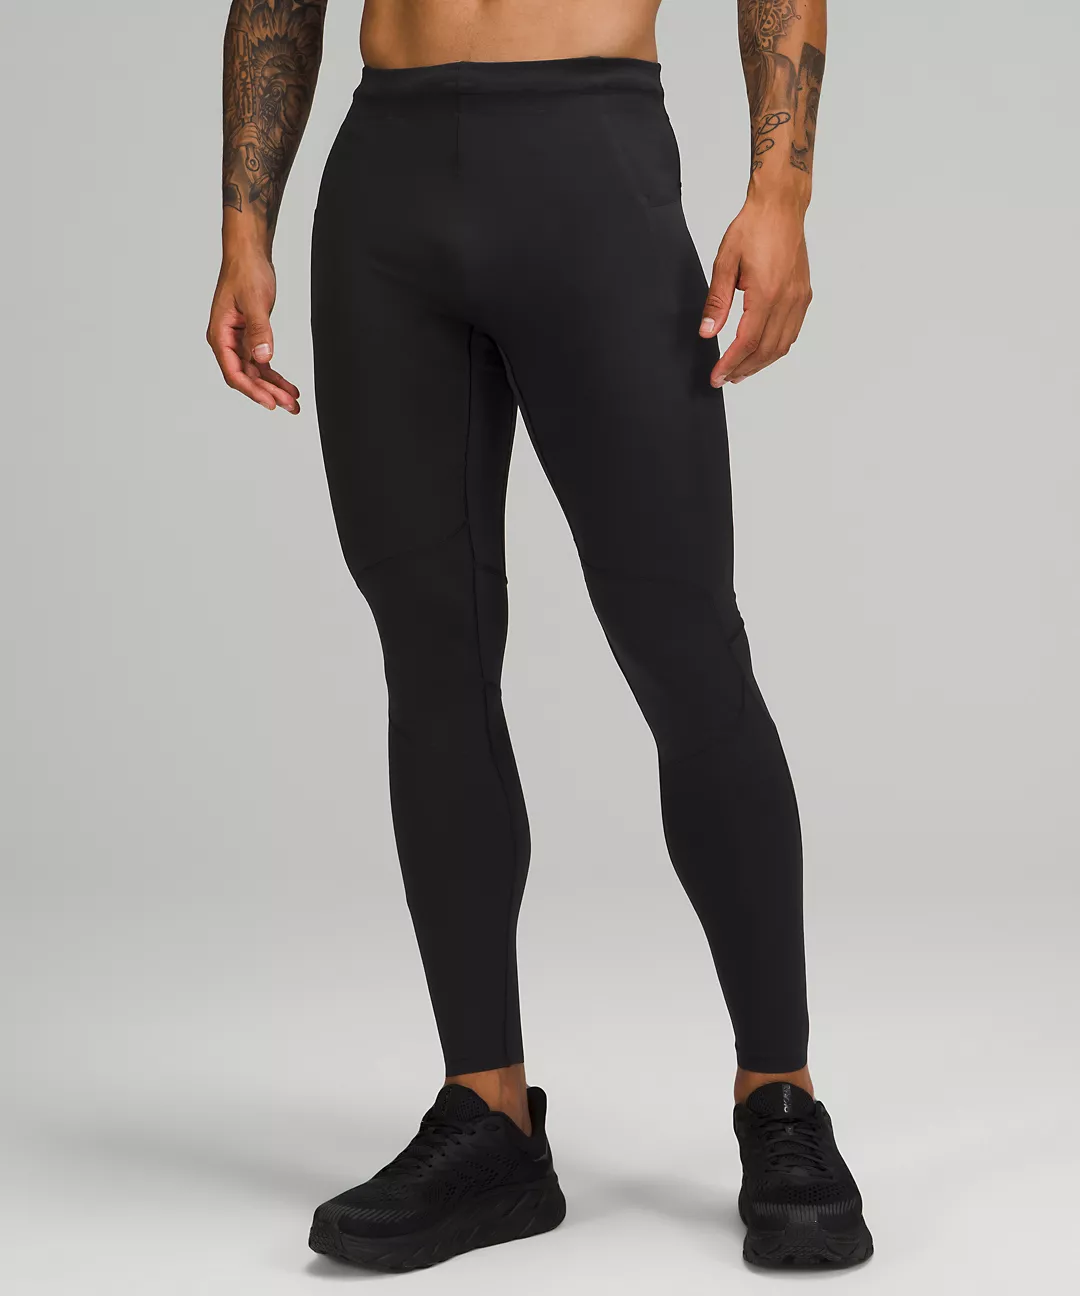 Best Men's Leggings: Top 5 Compression Pants Most Recommended By Experts